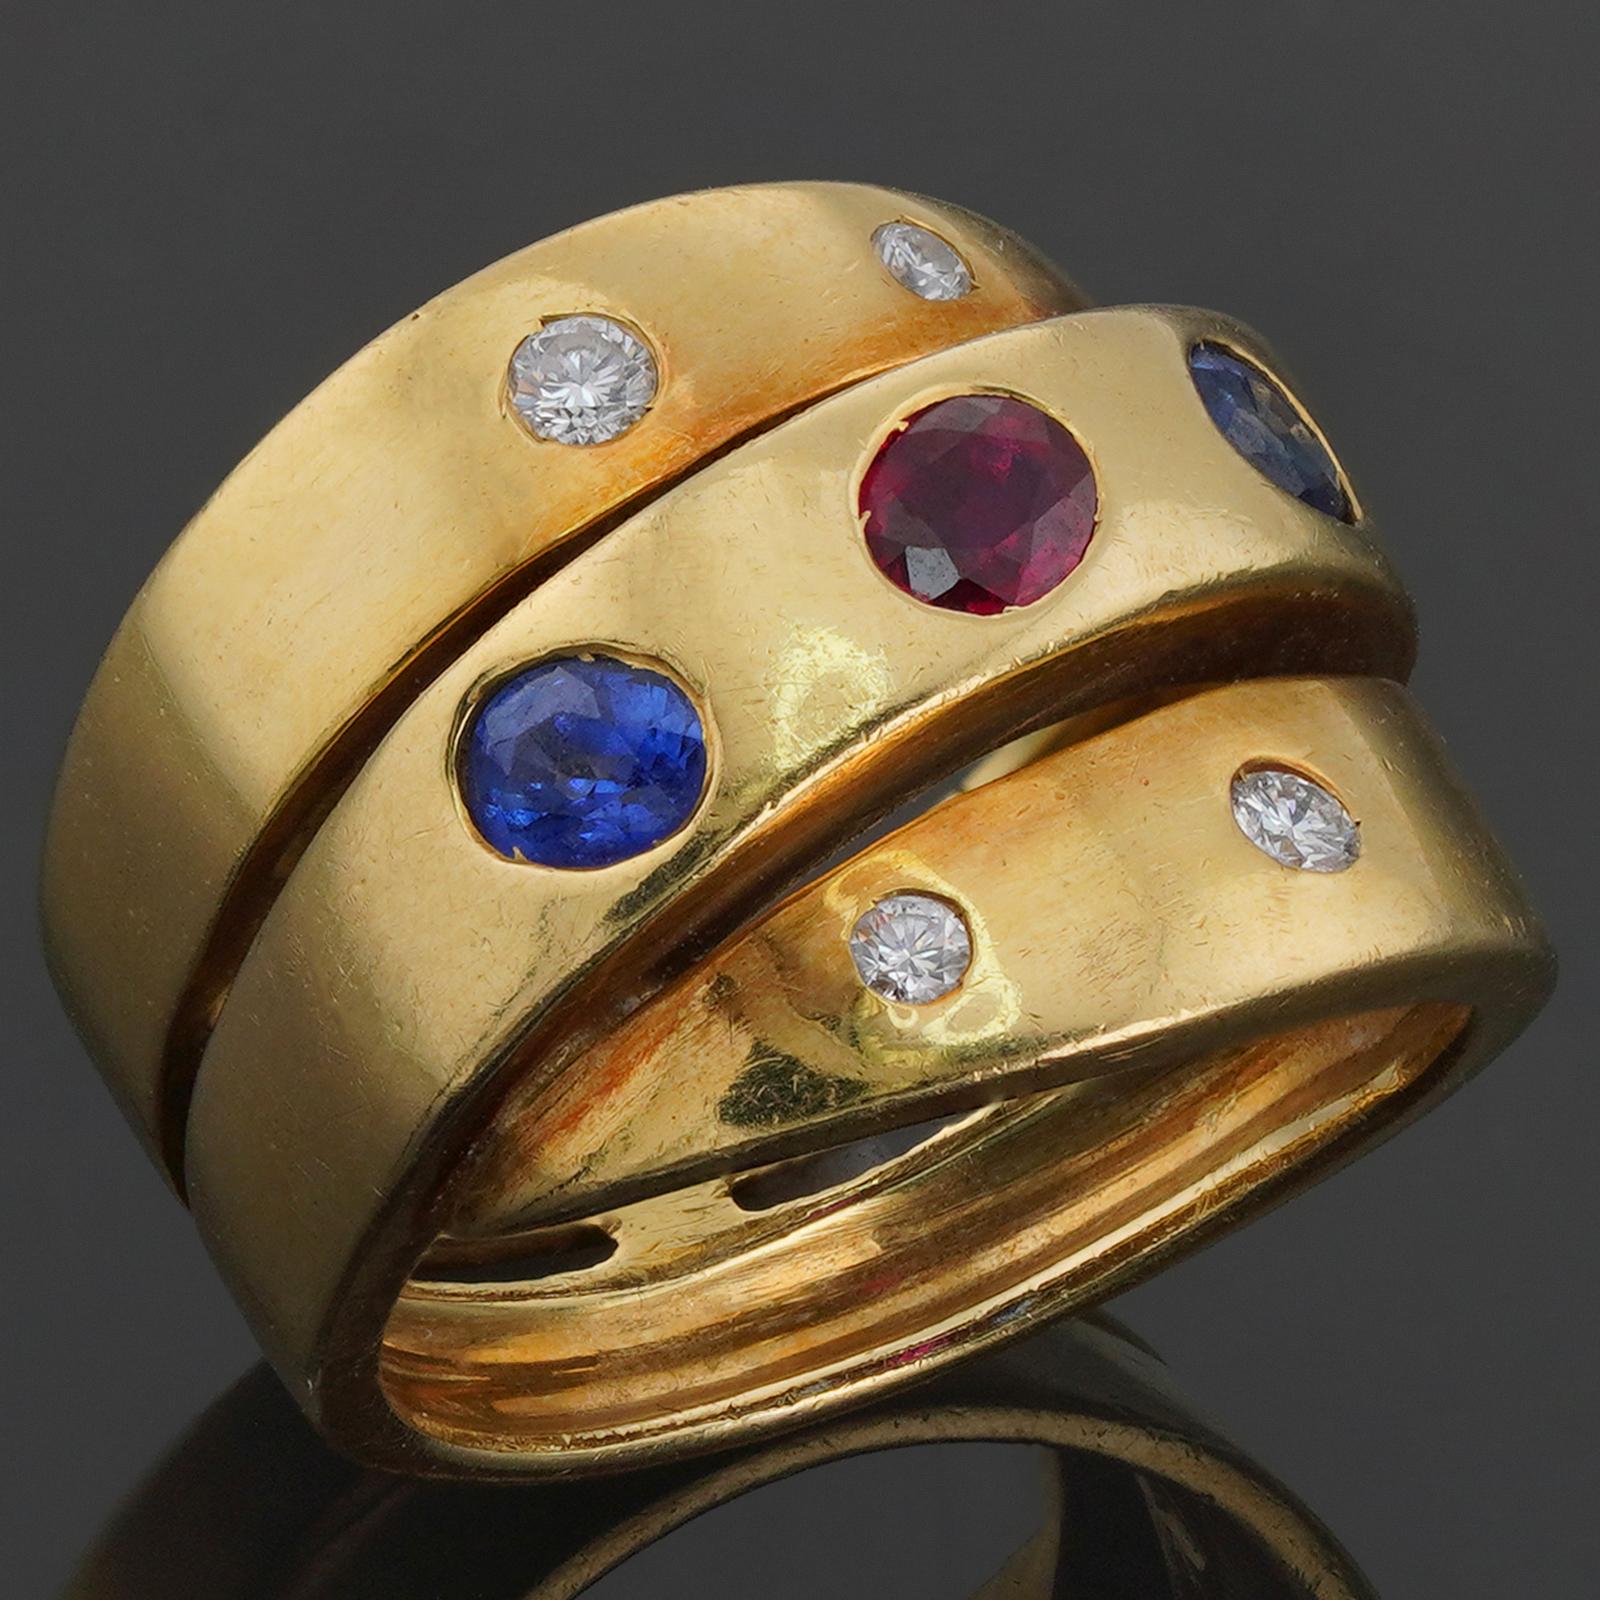 This fabulous vintage Van Cleef & Arpels ring features a wide band design crafted in 18k yellow gold and bezel-set with blue sapphire, red rubies, and diamonds. Made in France circa 1980s. Measurements: 0.59